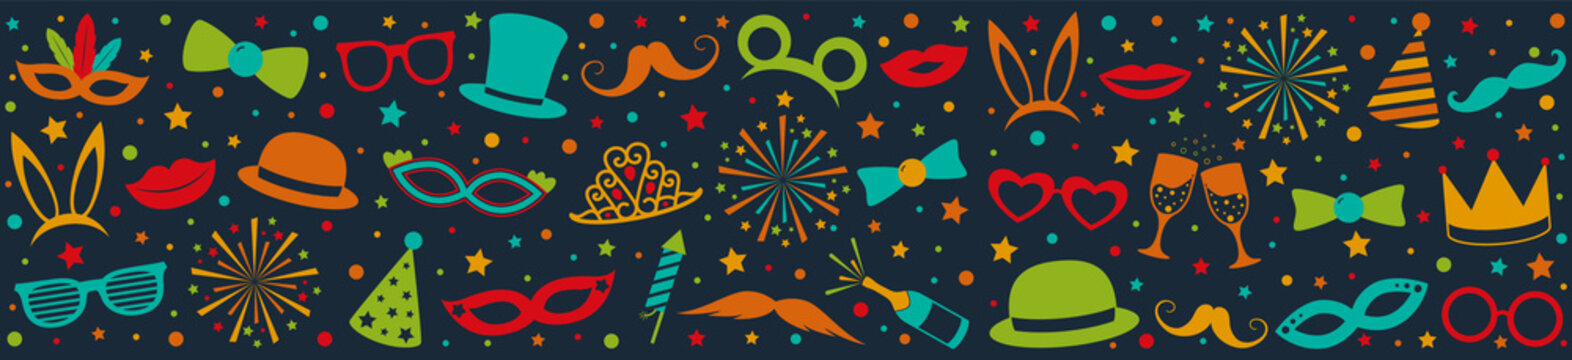 Party banner with colorful icons - panoramic header. Vector.